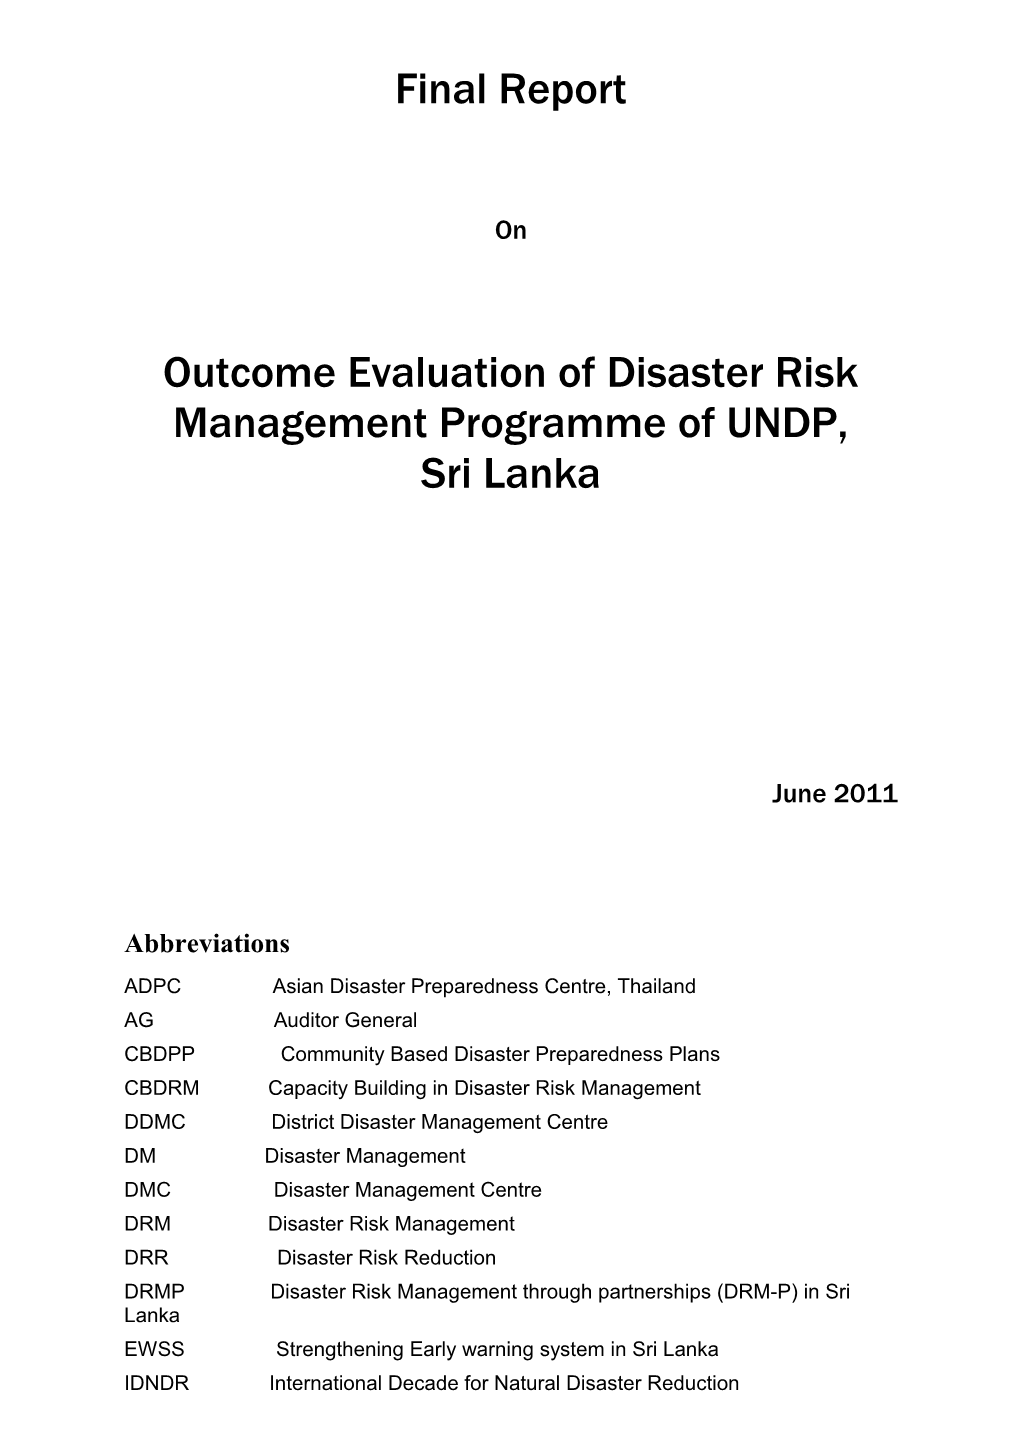 Outcome Evaluation of Disaster Risk Management Programme of UNDP